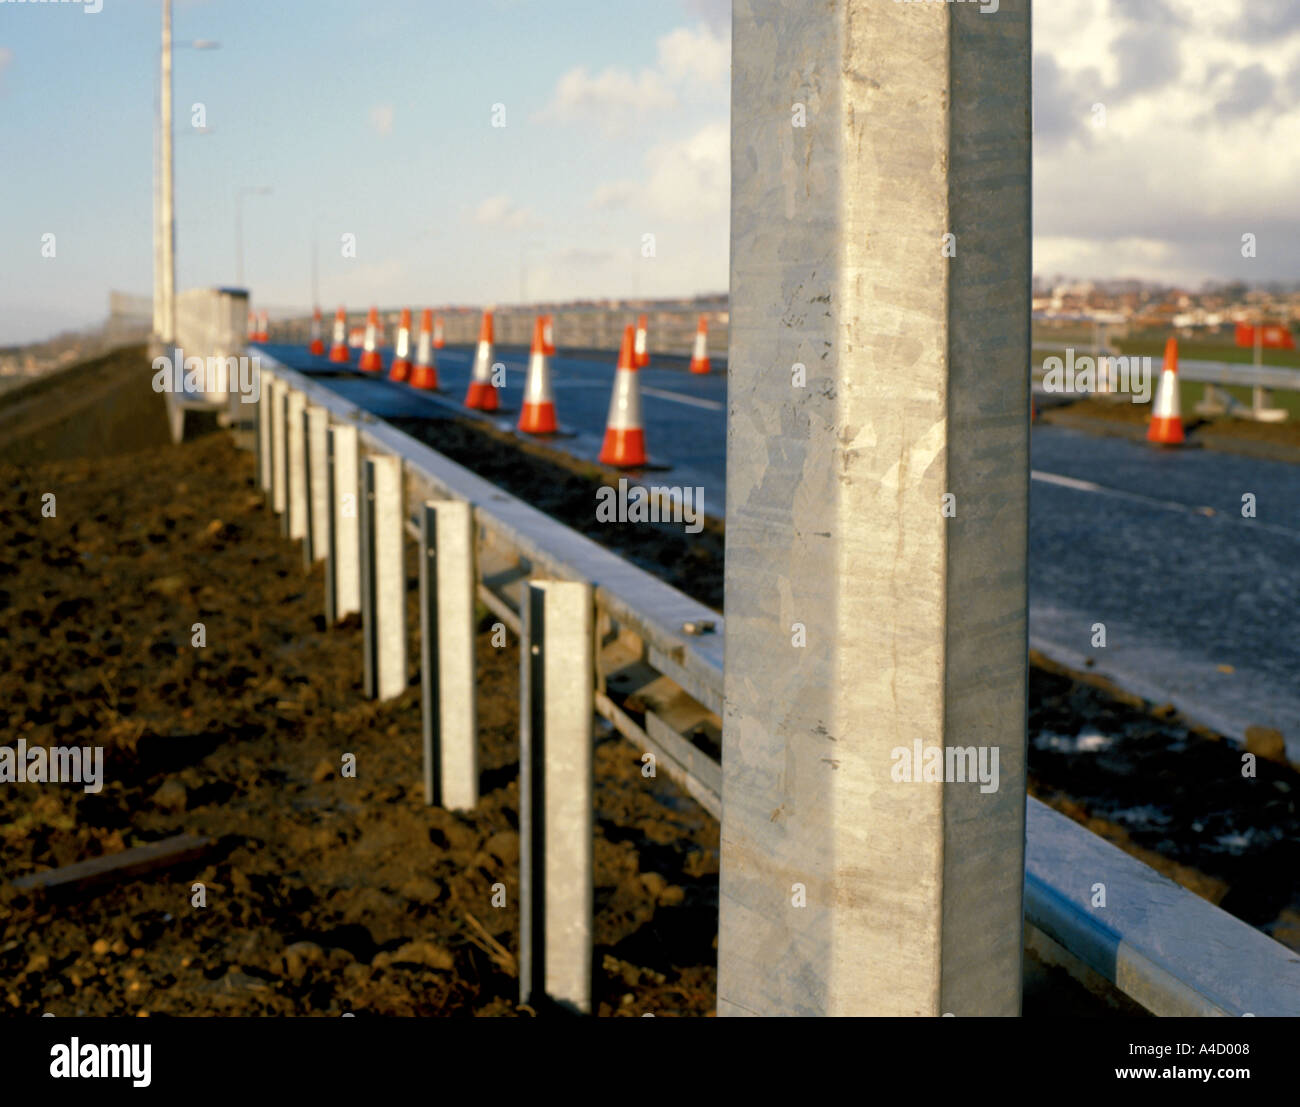 Galvanised steel lamp post and crash barrier showing zinc crystals,  England, UK Stock Photo - Alamy